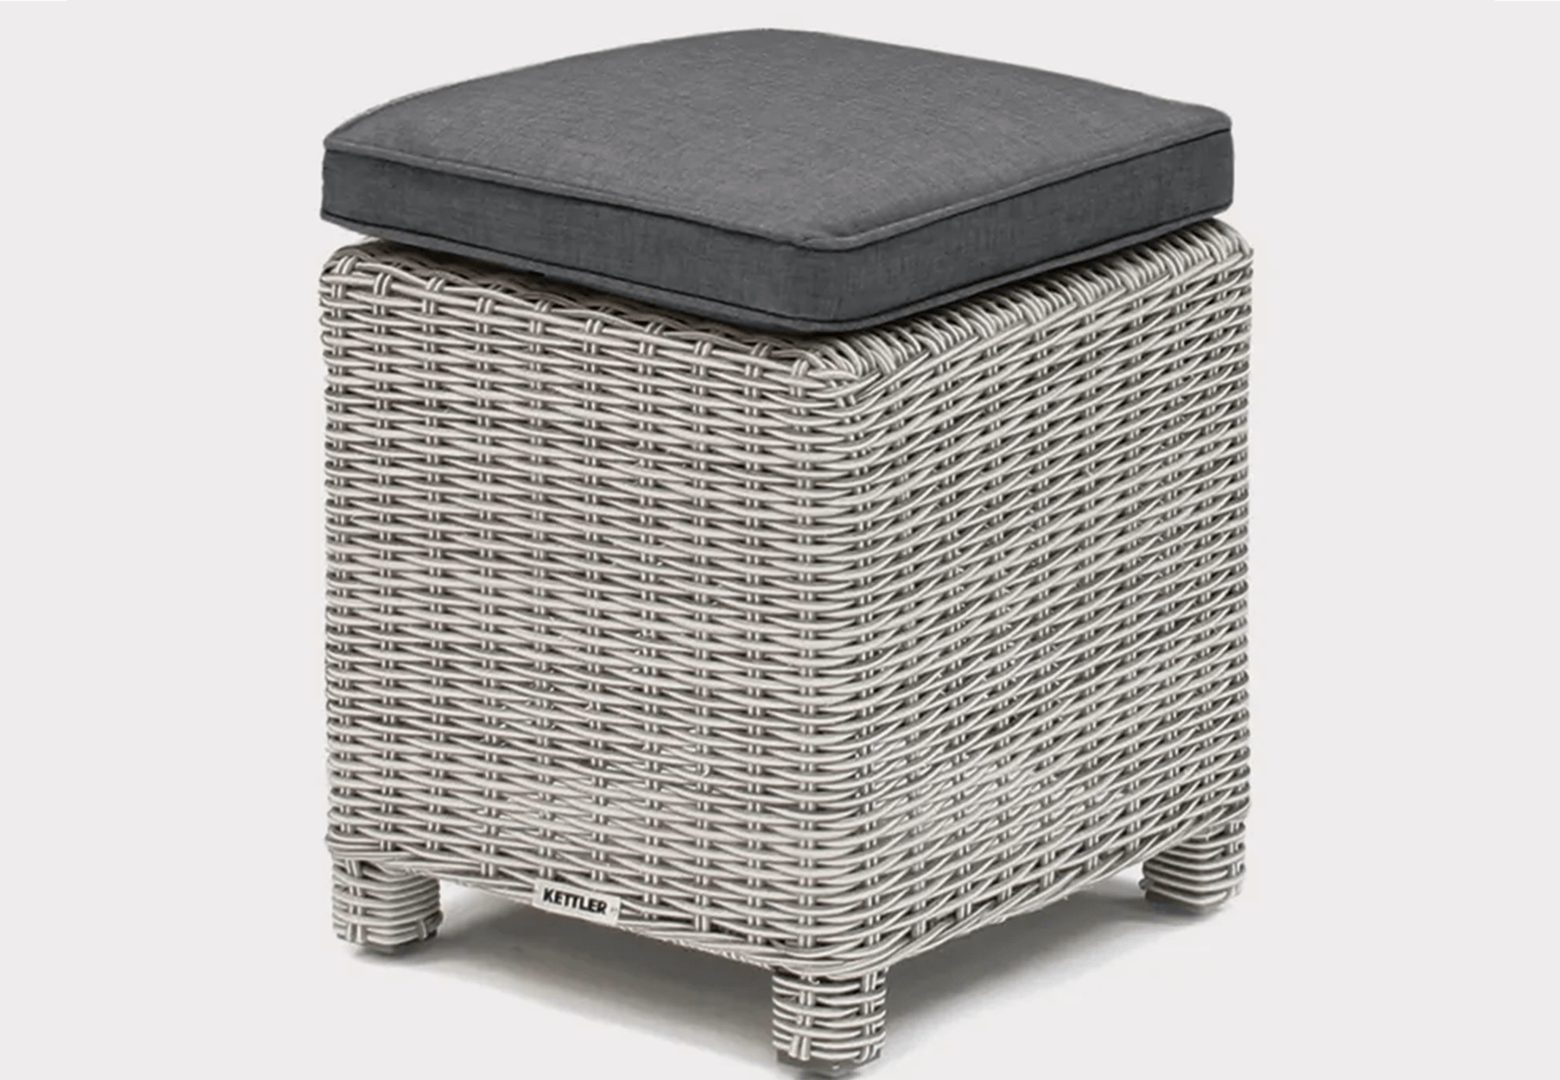 Image of Kettler Palma Stool in White Wash and Taupe